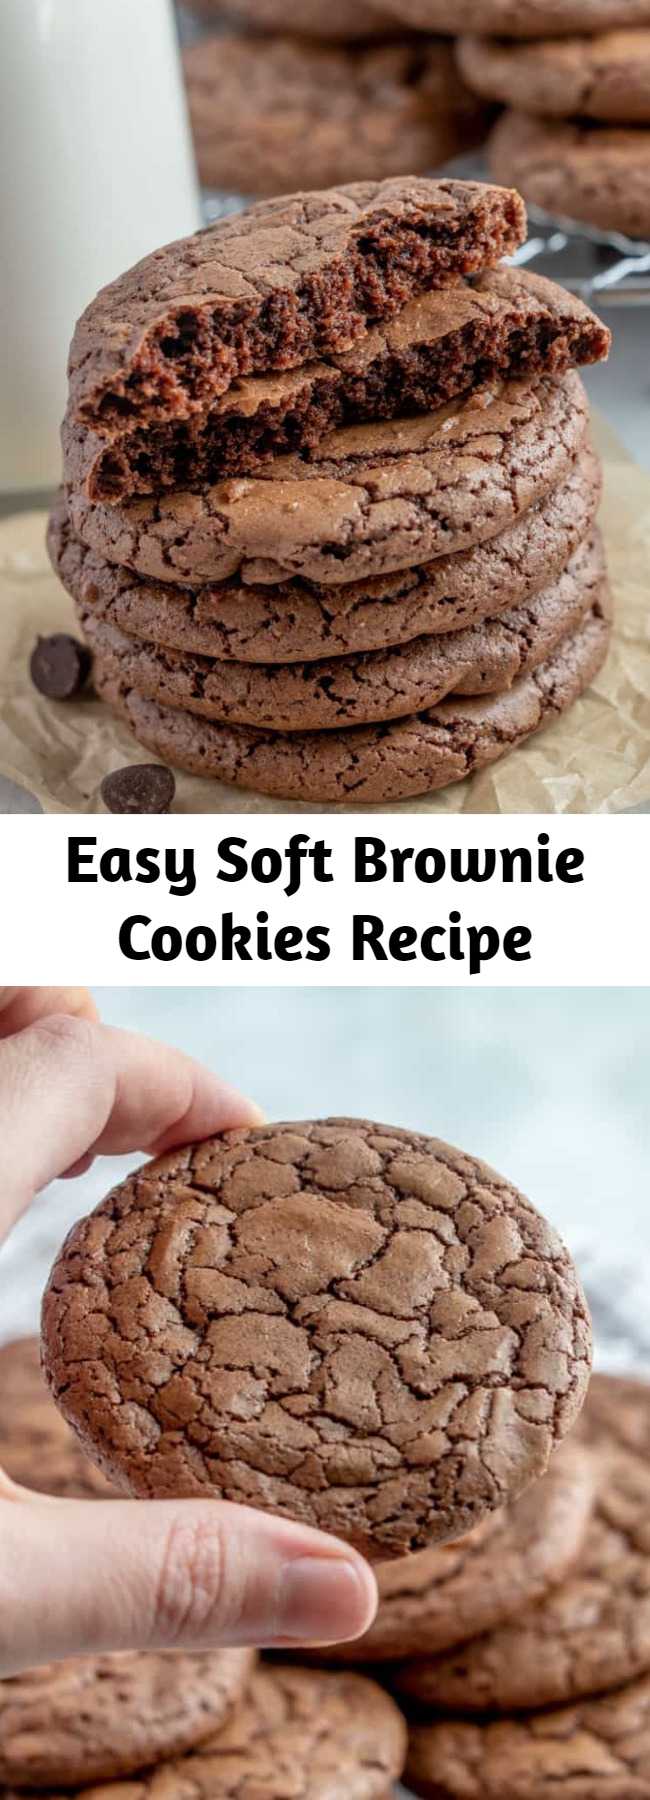 Easy Soft Brownie Cookies Recipe - Easy, delicious and soft, these Brownie Cookies are one of the most perfect additions to your dessert menu! Chocolatey, chewy and taste just like a brownie. #cookies #chocolate #brownies #desserts #baking #easyrecipe #browniecookies #sweets